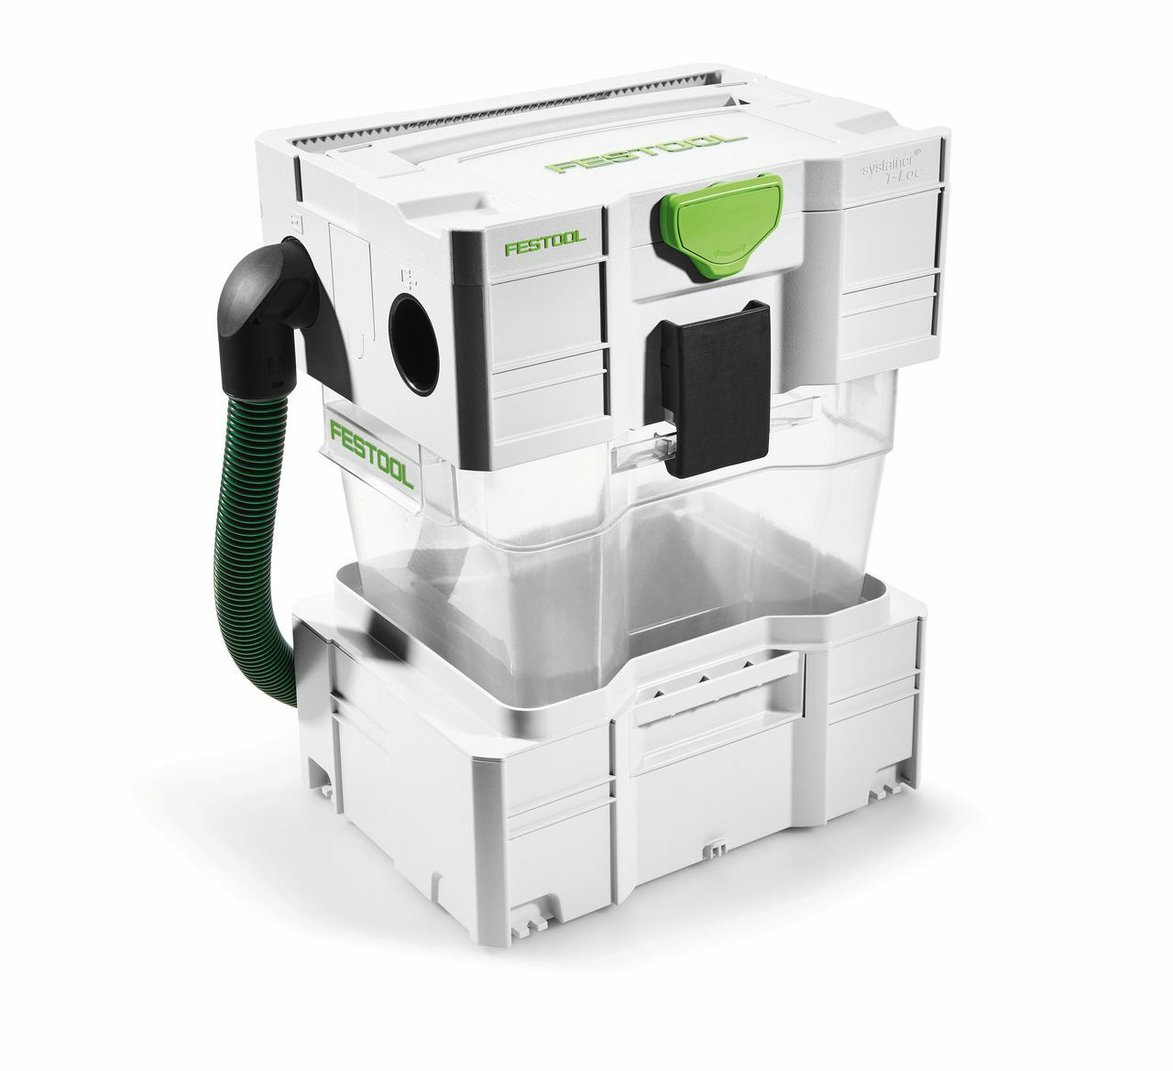 Conquer the Mess With These Festool Dust Extractor Accessories - US Tool and Fastener - Festool accessories, Festool kit, Festool deals, Festool repair, Festool dust extractor comparison